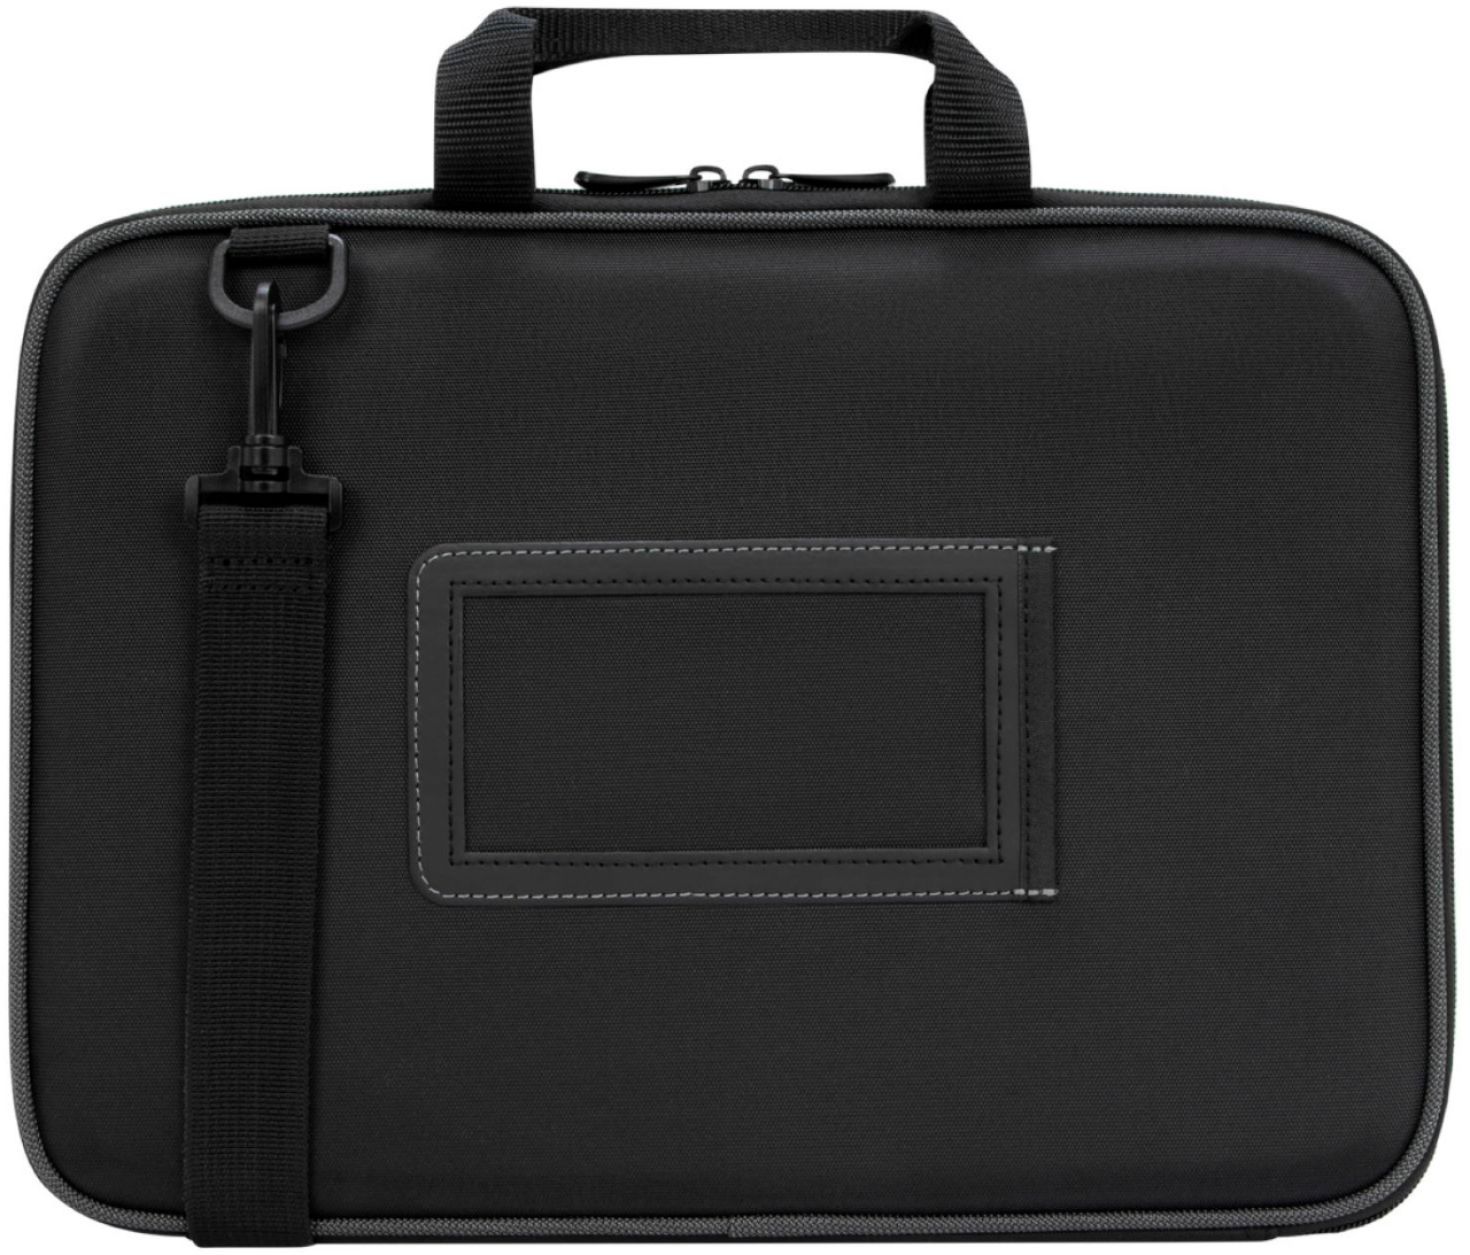 Back View: Targus - Work-in Essentials Case for 13-14" Chromebook™ - Black/Gray